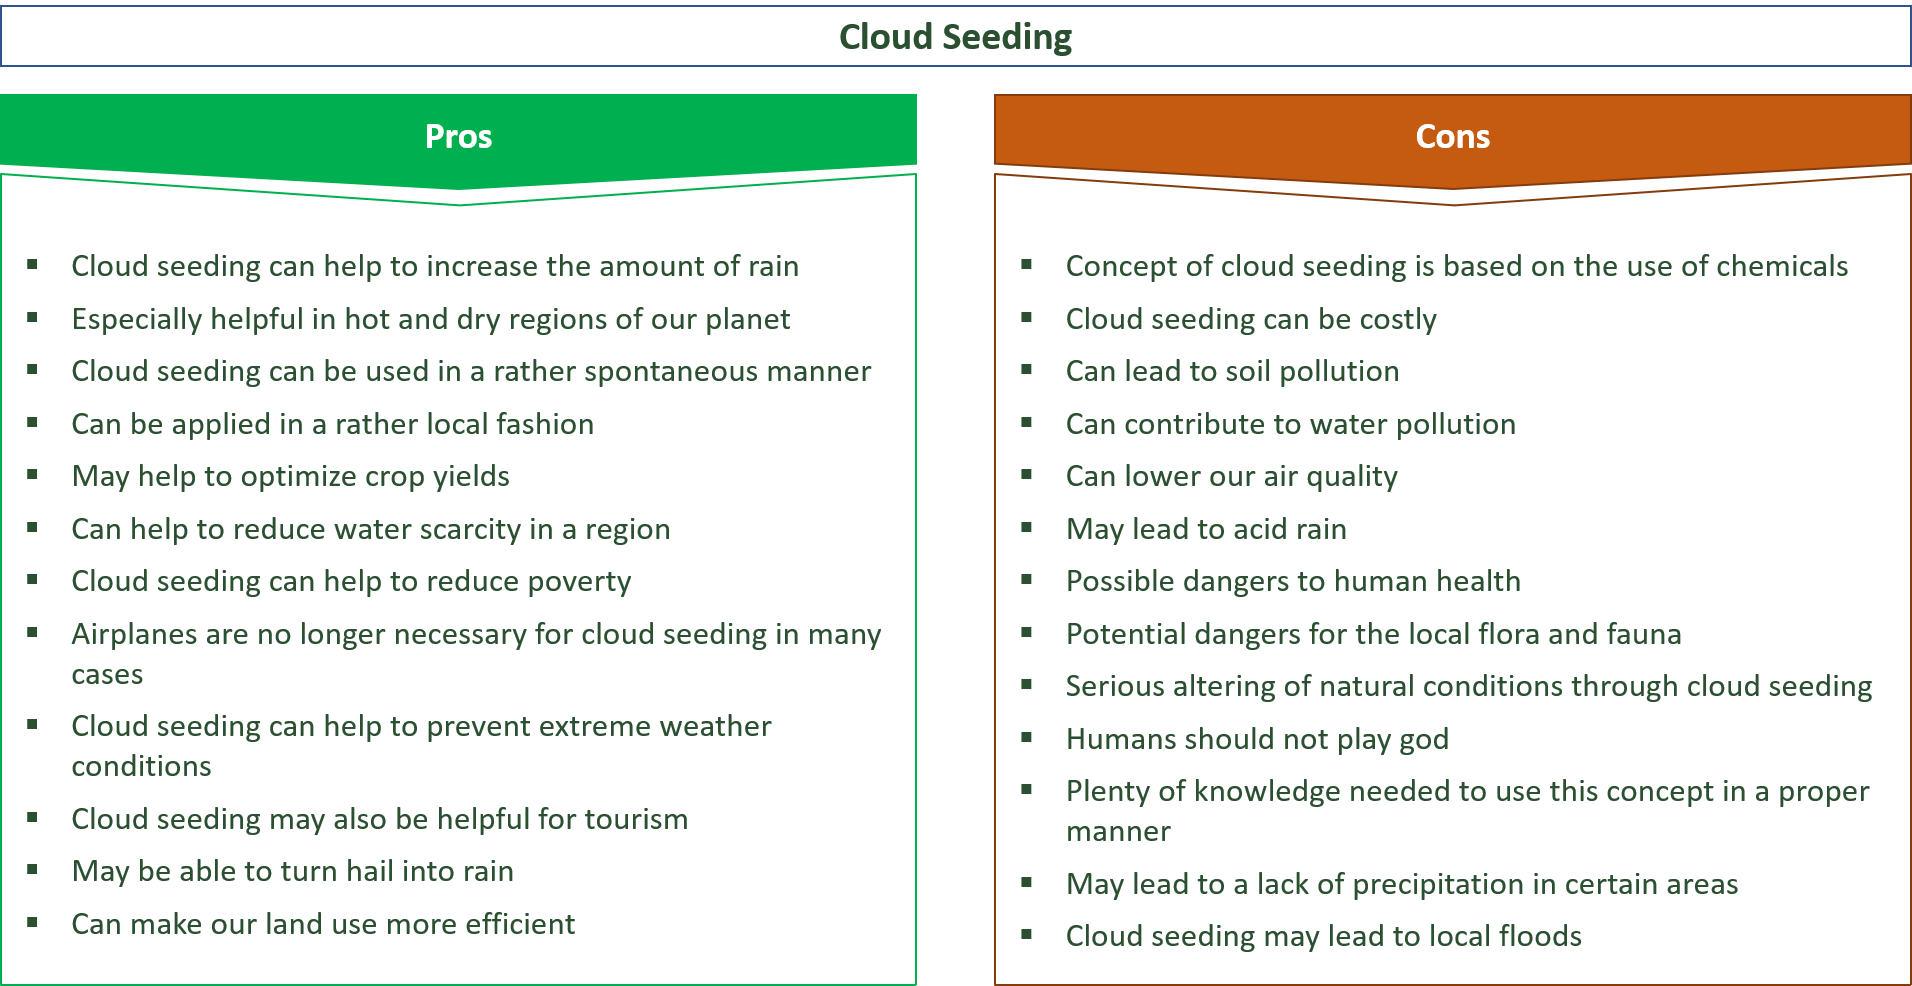 cloud-seeding-pros-cons.png